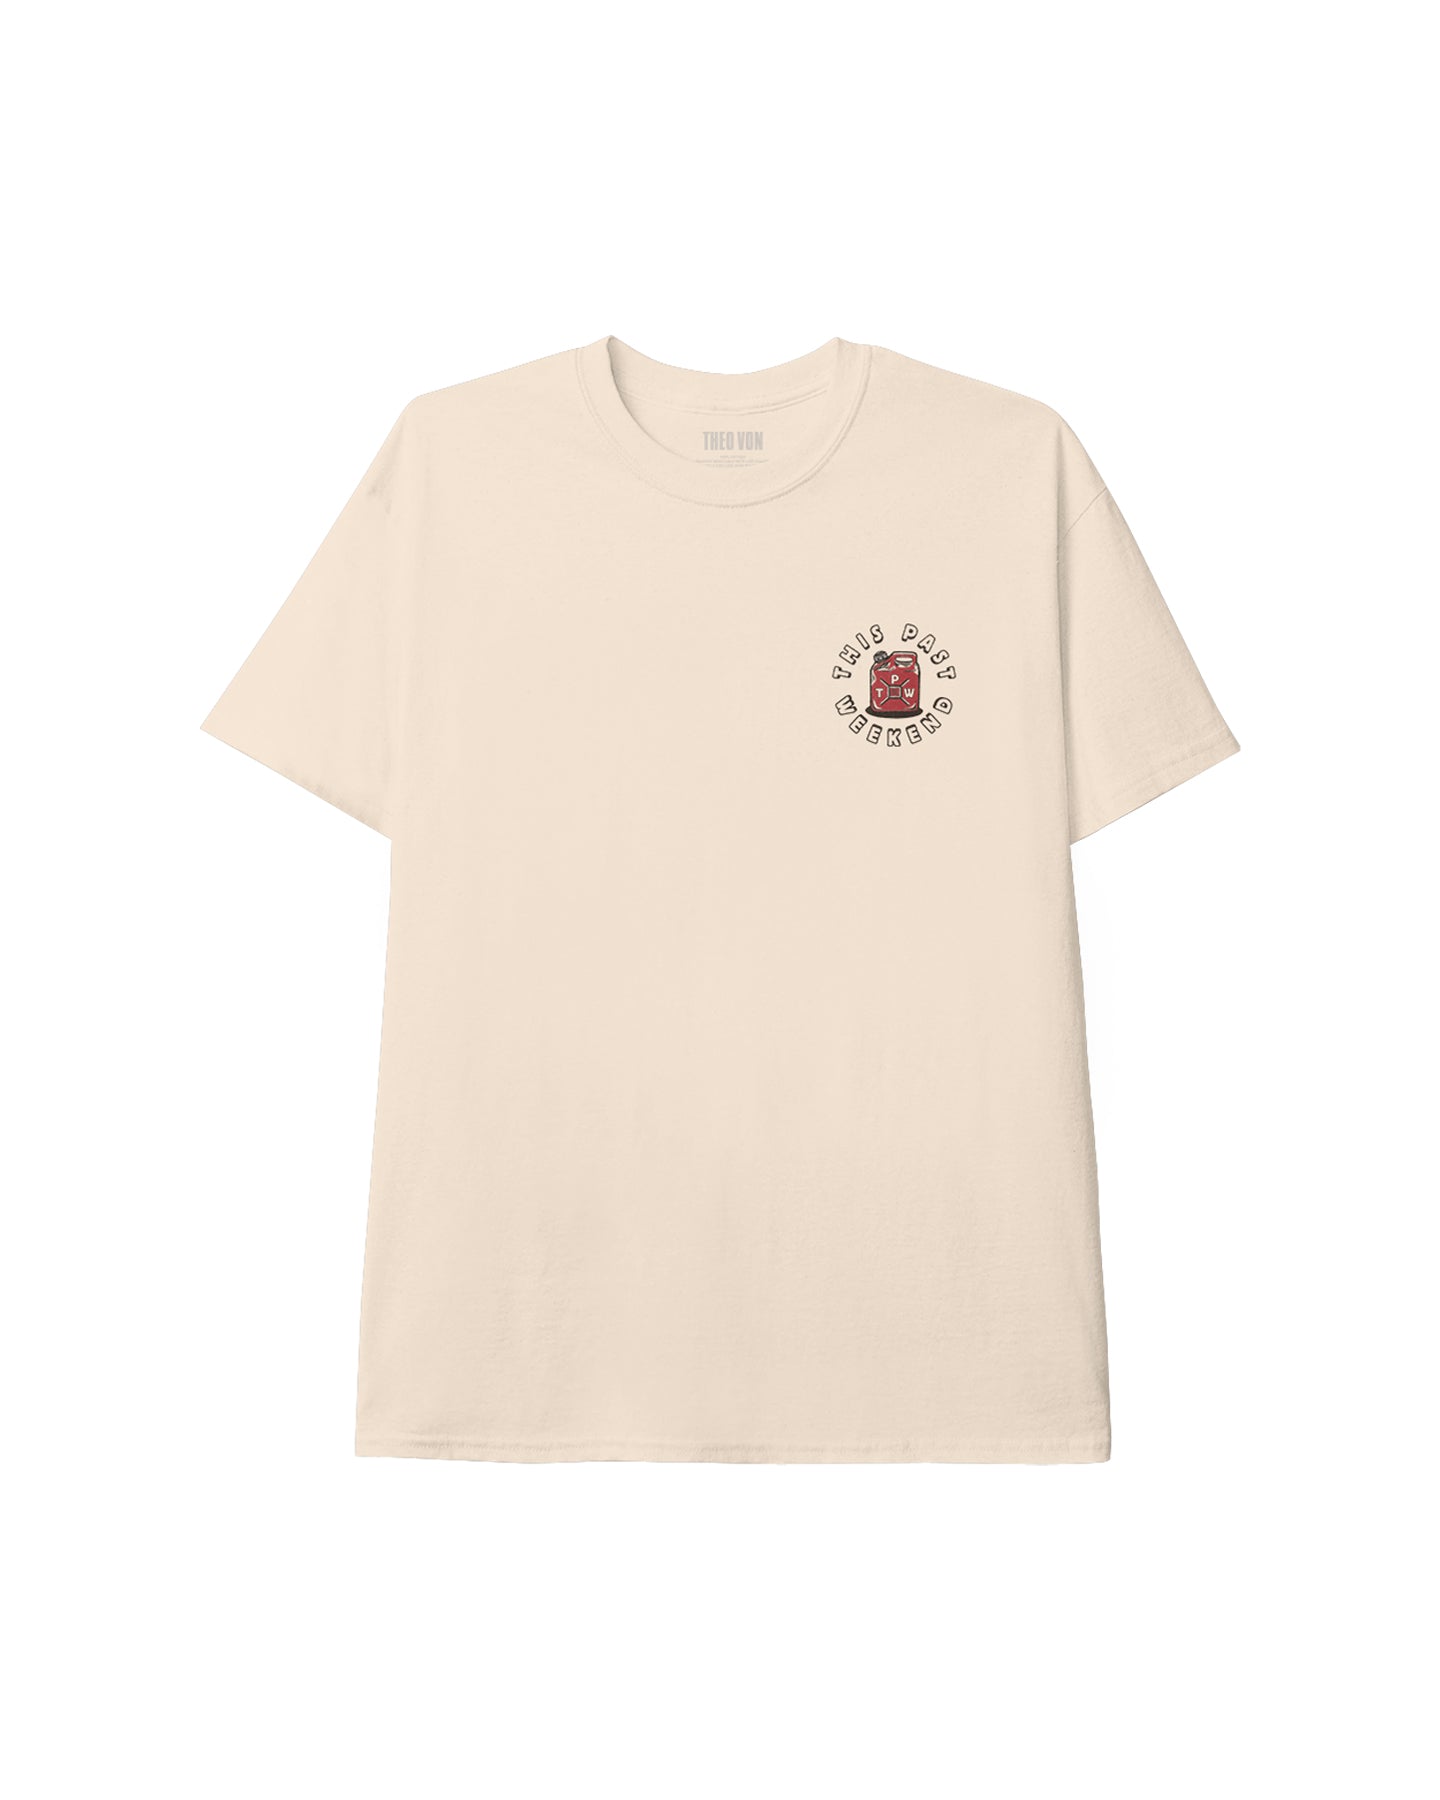 Out of Gas Tan Tee